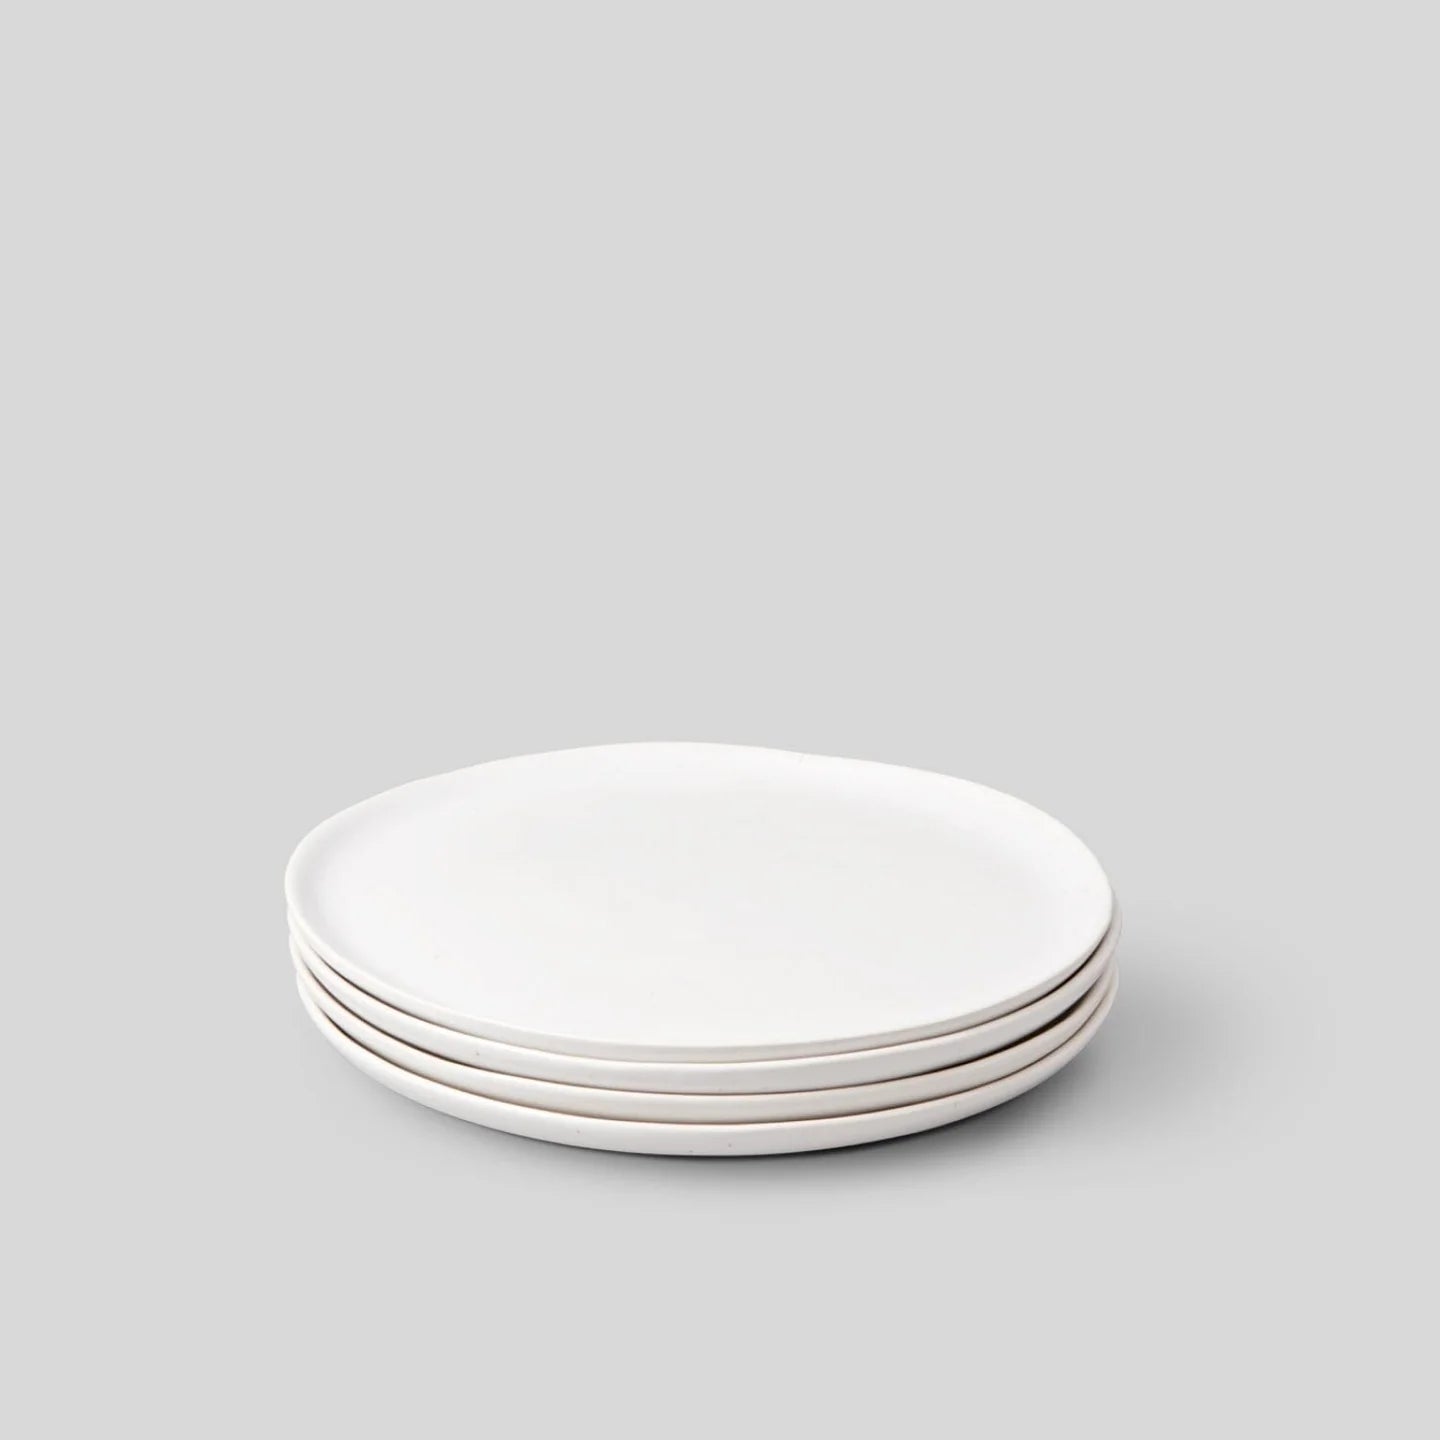 The Salad Plates (4) - Speckled White